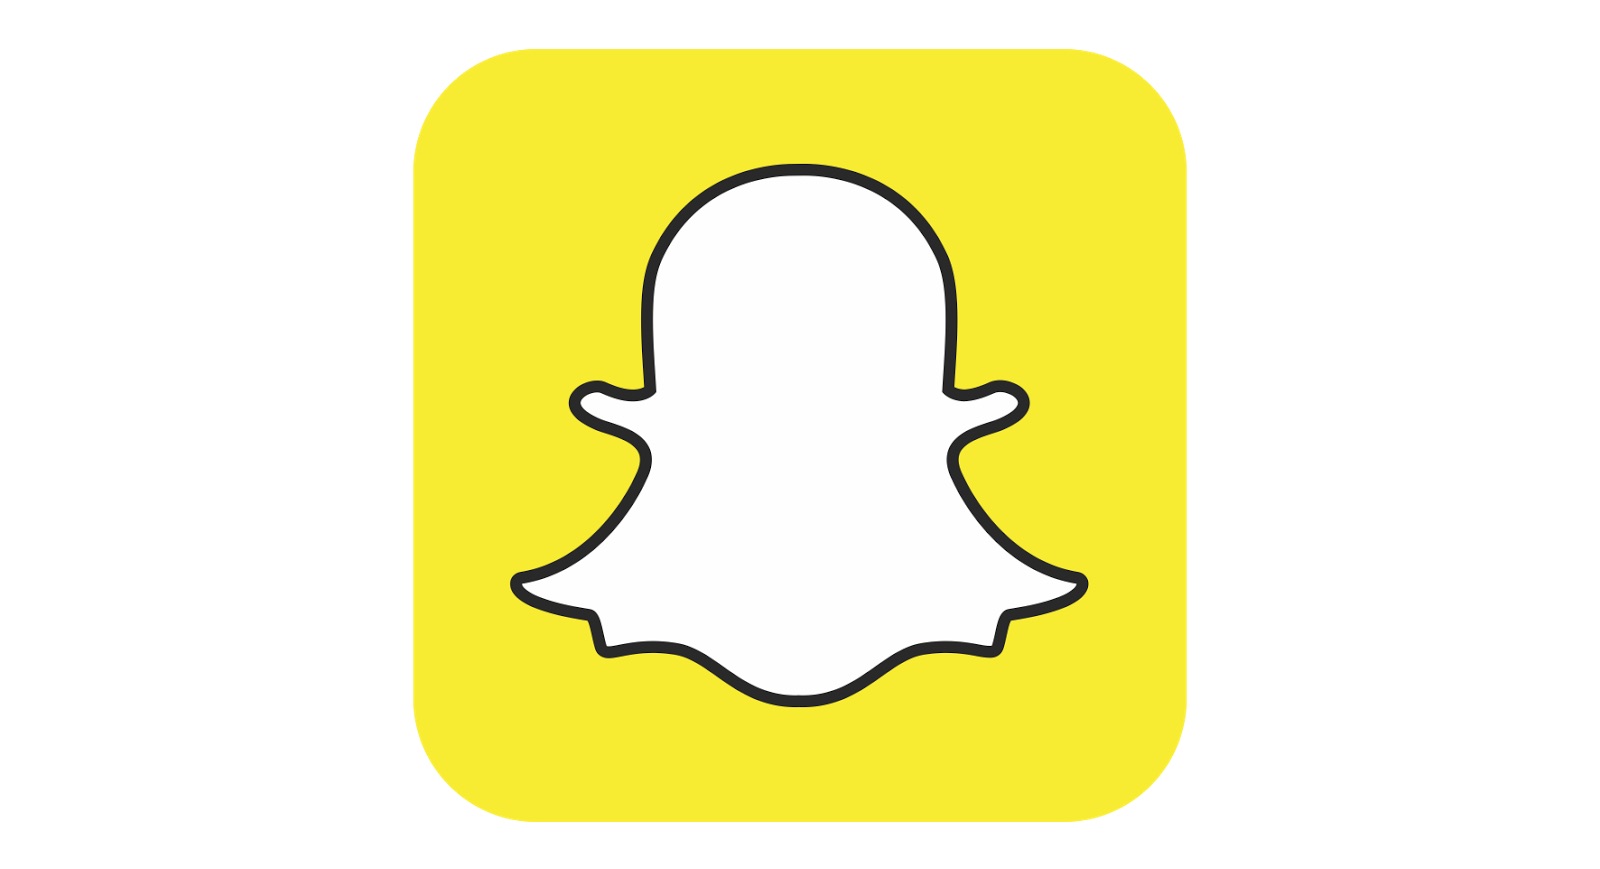 Snapchat Redesign Takes a Step Back - But, is it Too Late?